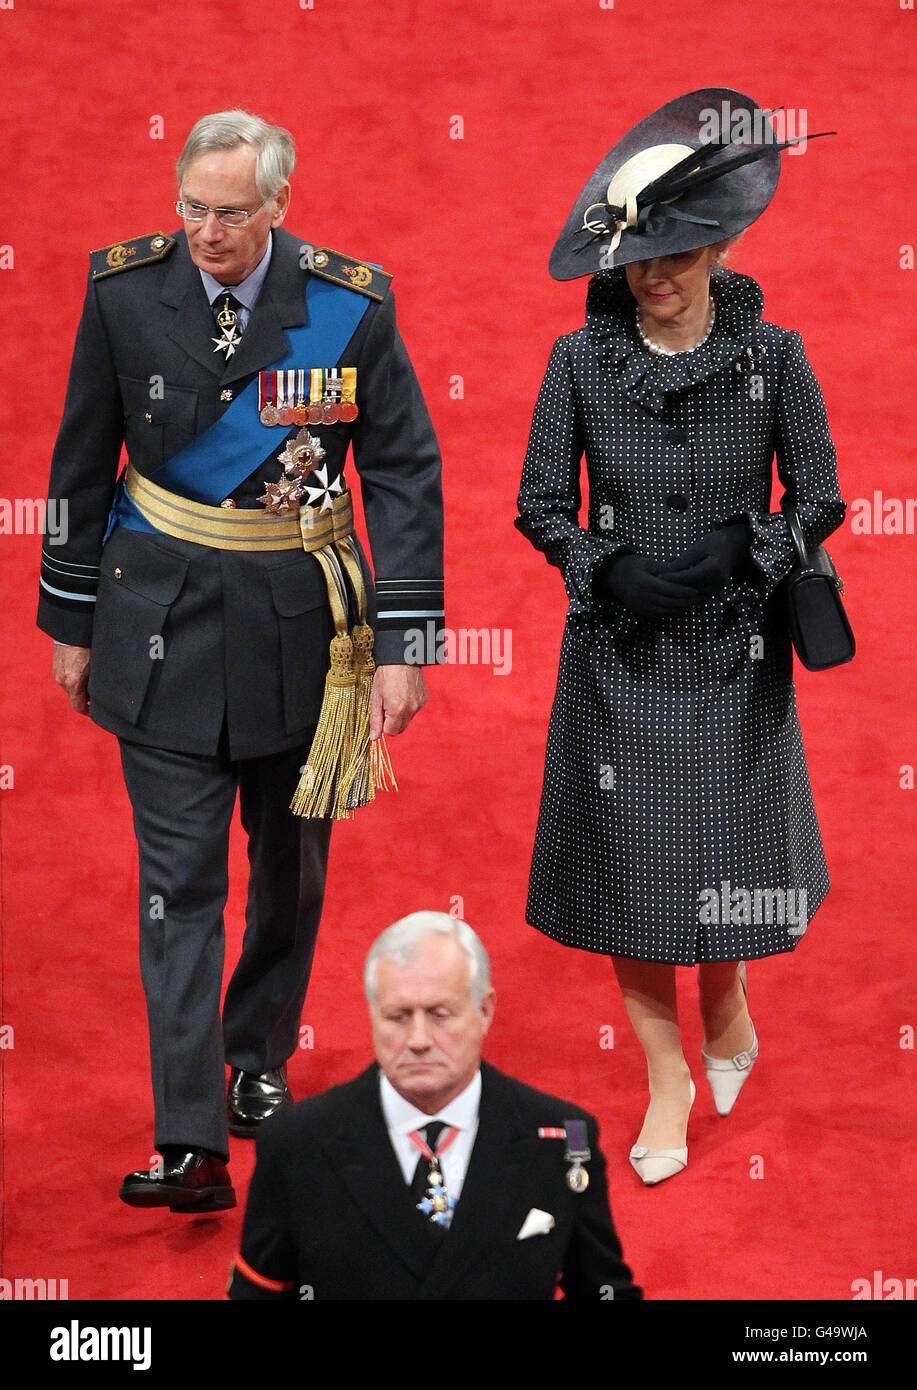 The Royal Wedding. The Duke and Duchess of Gloucester Stock Photo - Alamy